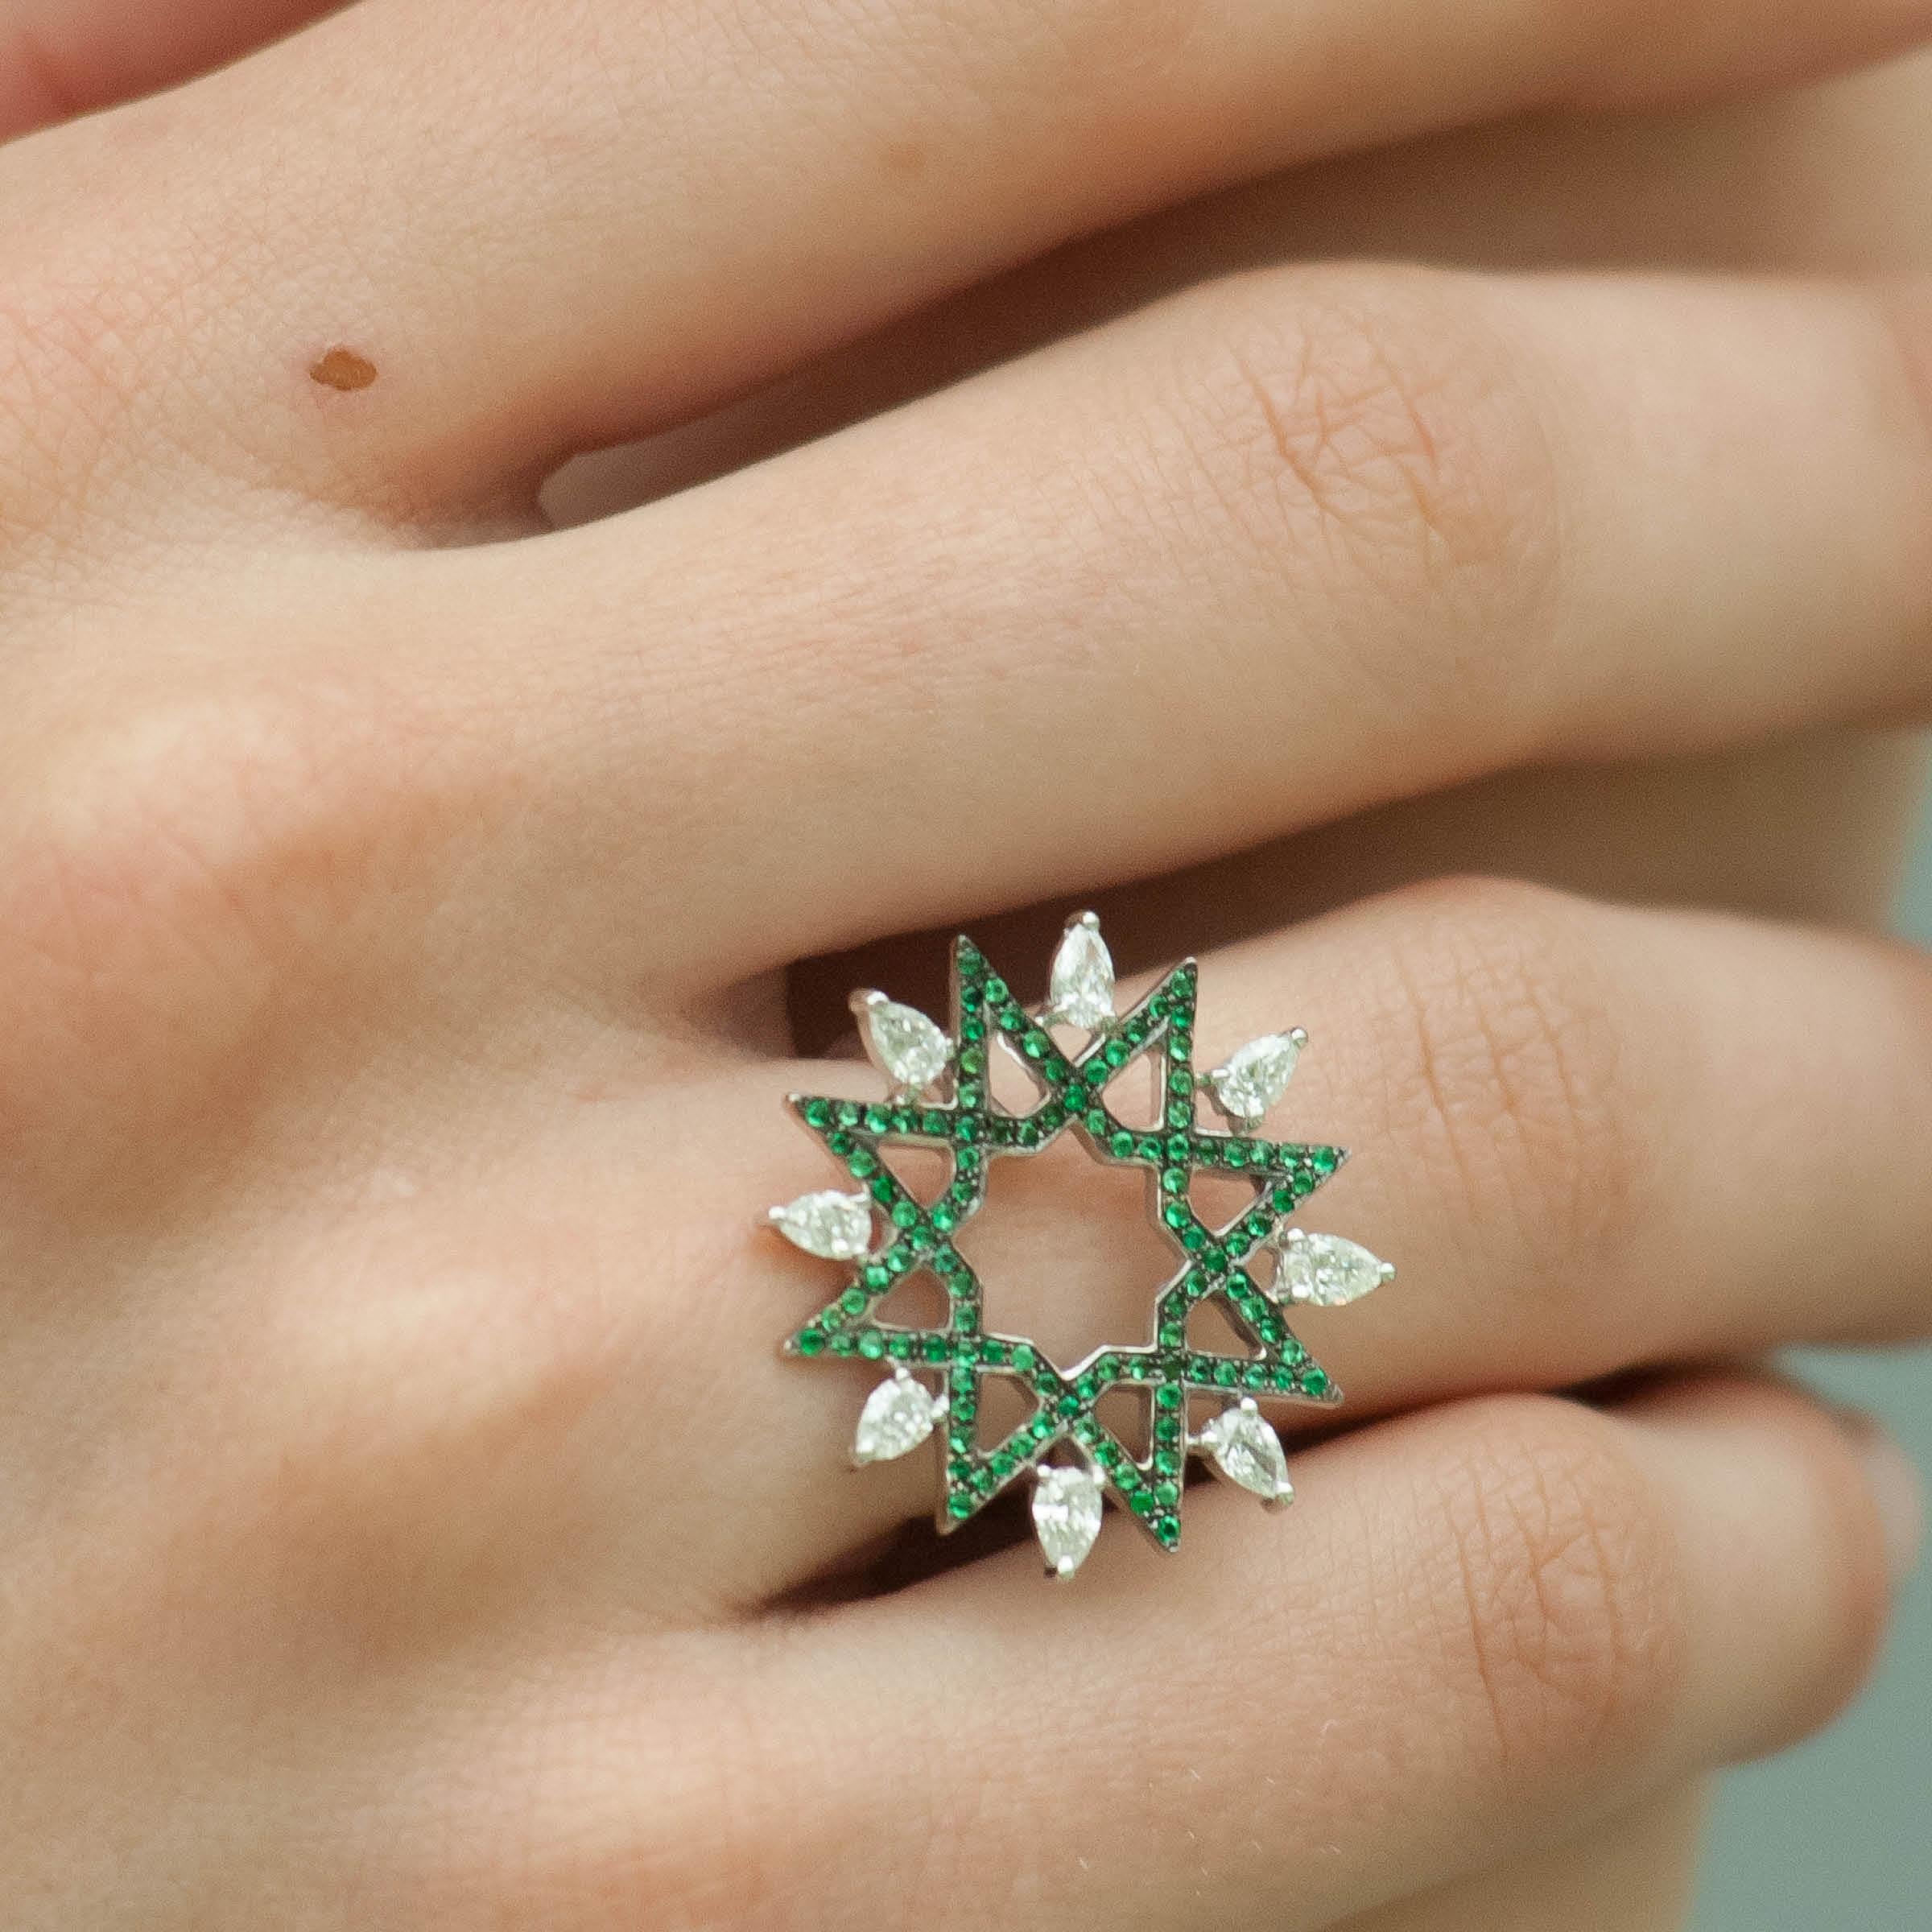 Add a stellar touch to any look with this standout ring. Richly-hued emeralds are accented with pear shaped diamonds.

18K White Gold
Diamond TCW is 0.90
Emerald TCW is 0.80
Diameter of embellishment is approx. 1 inch
Ring is size 7